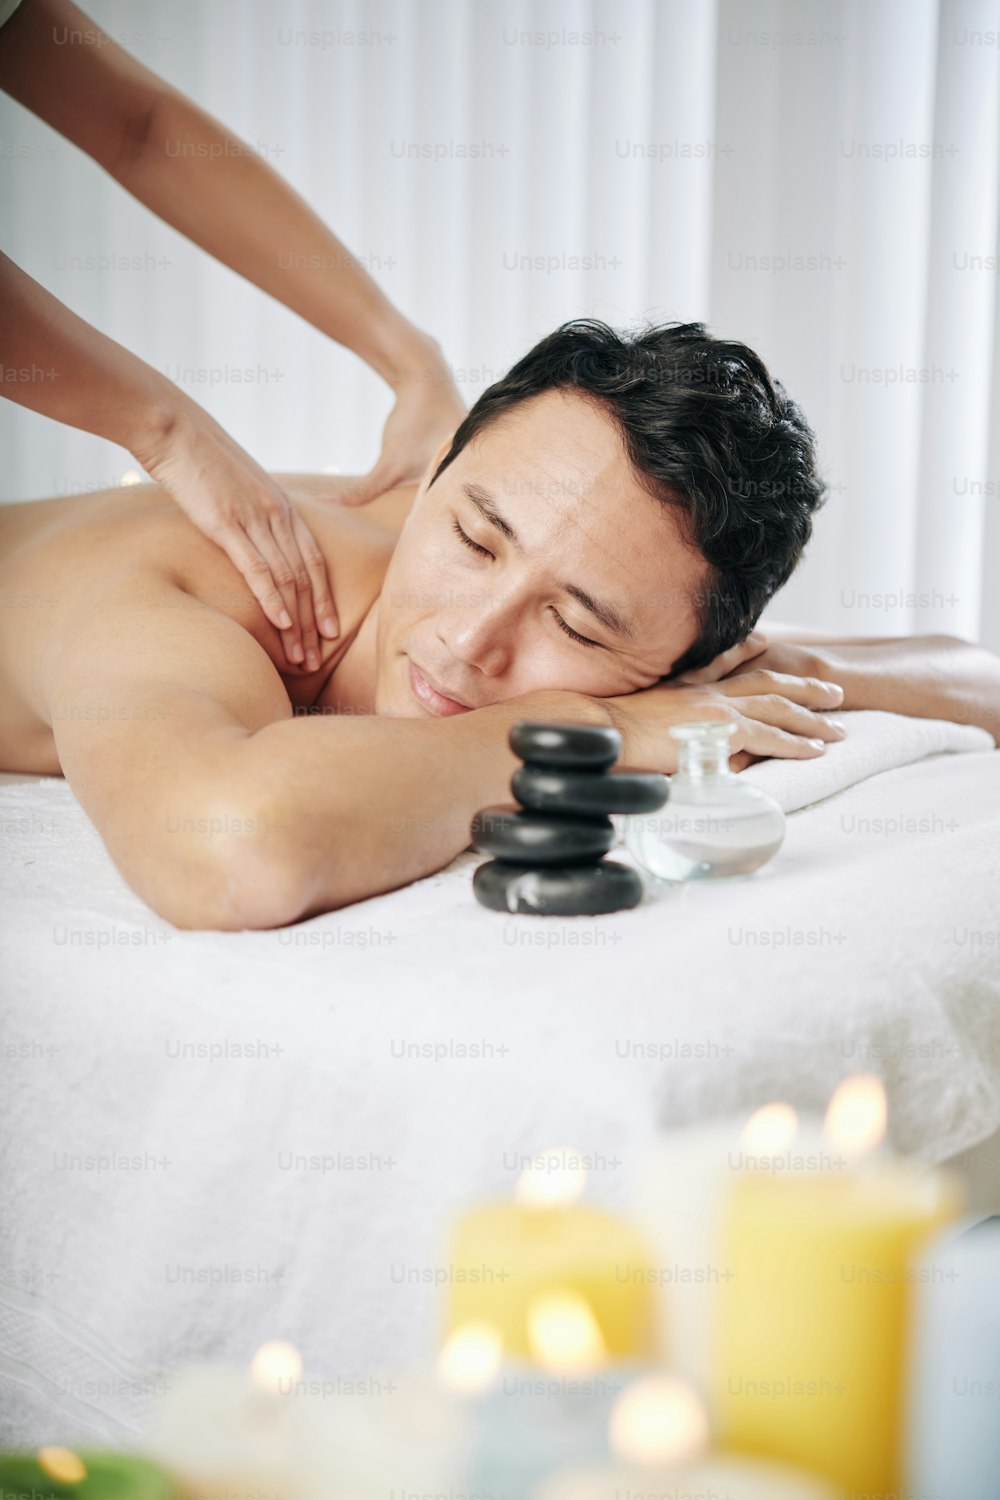 Man enjoying relaxing back massage in spa salon after difficult day at work